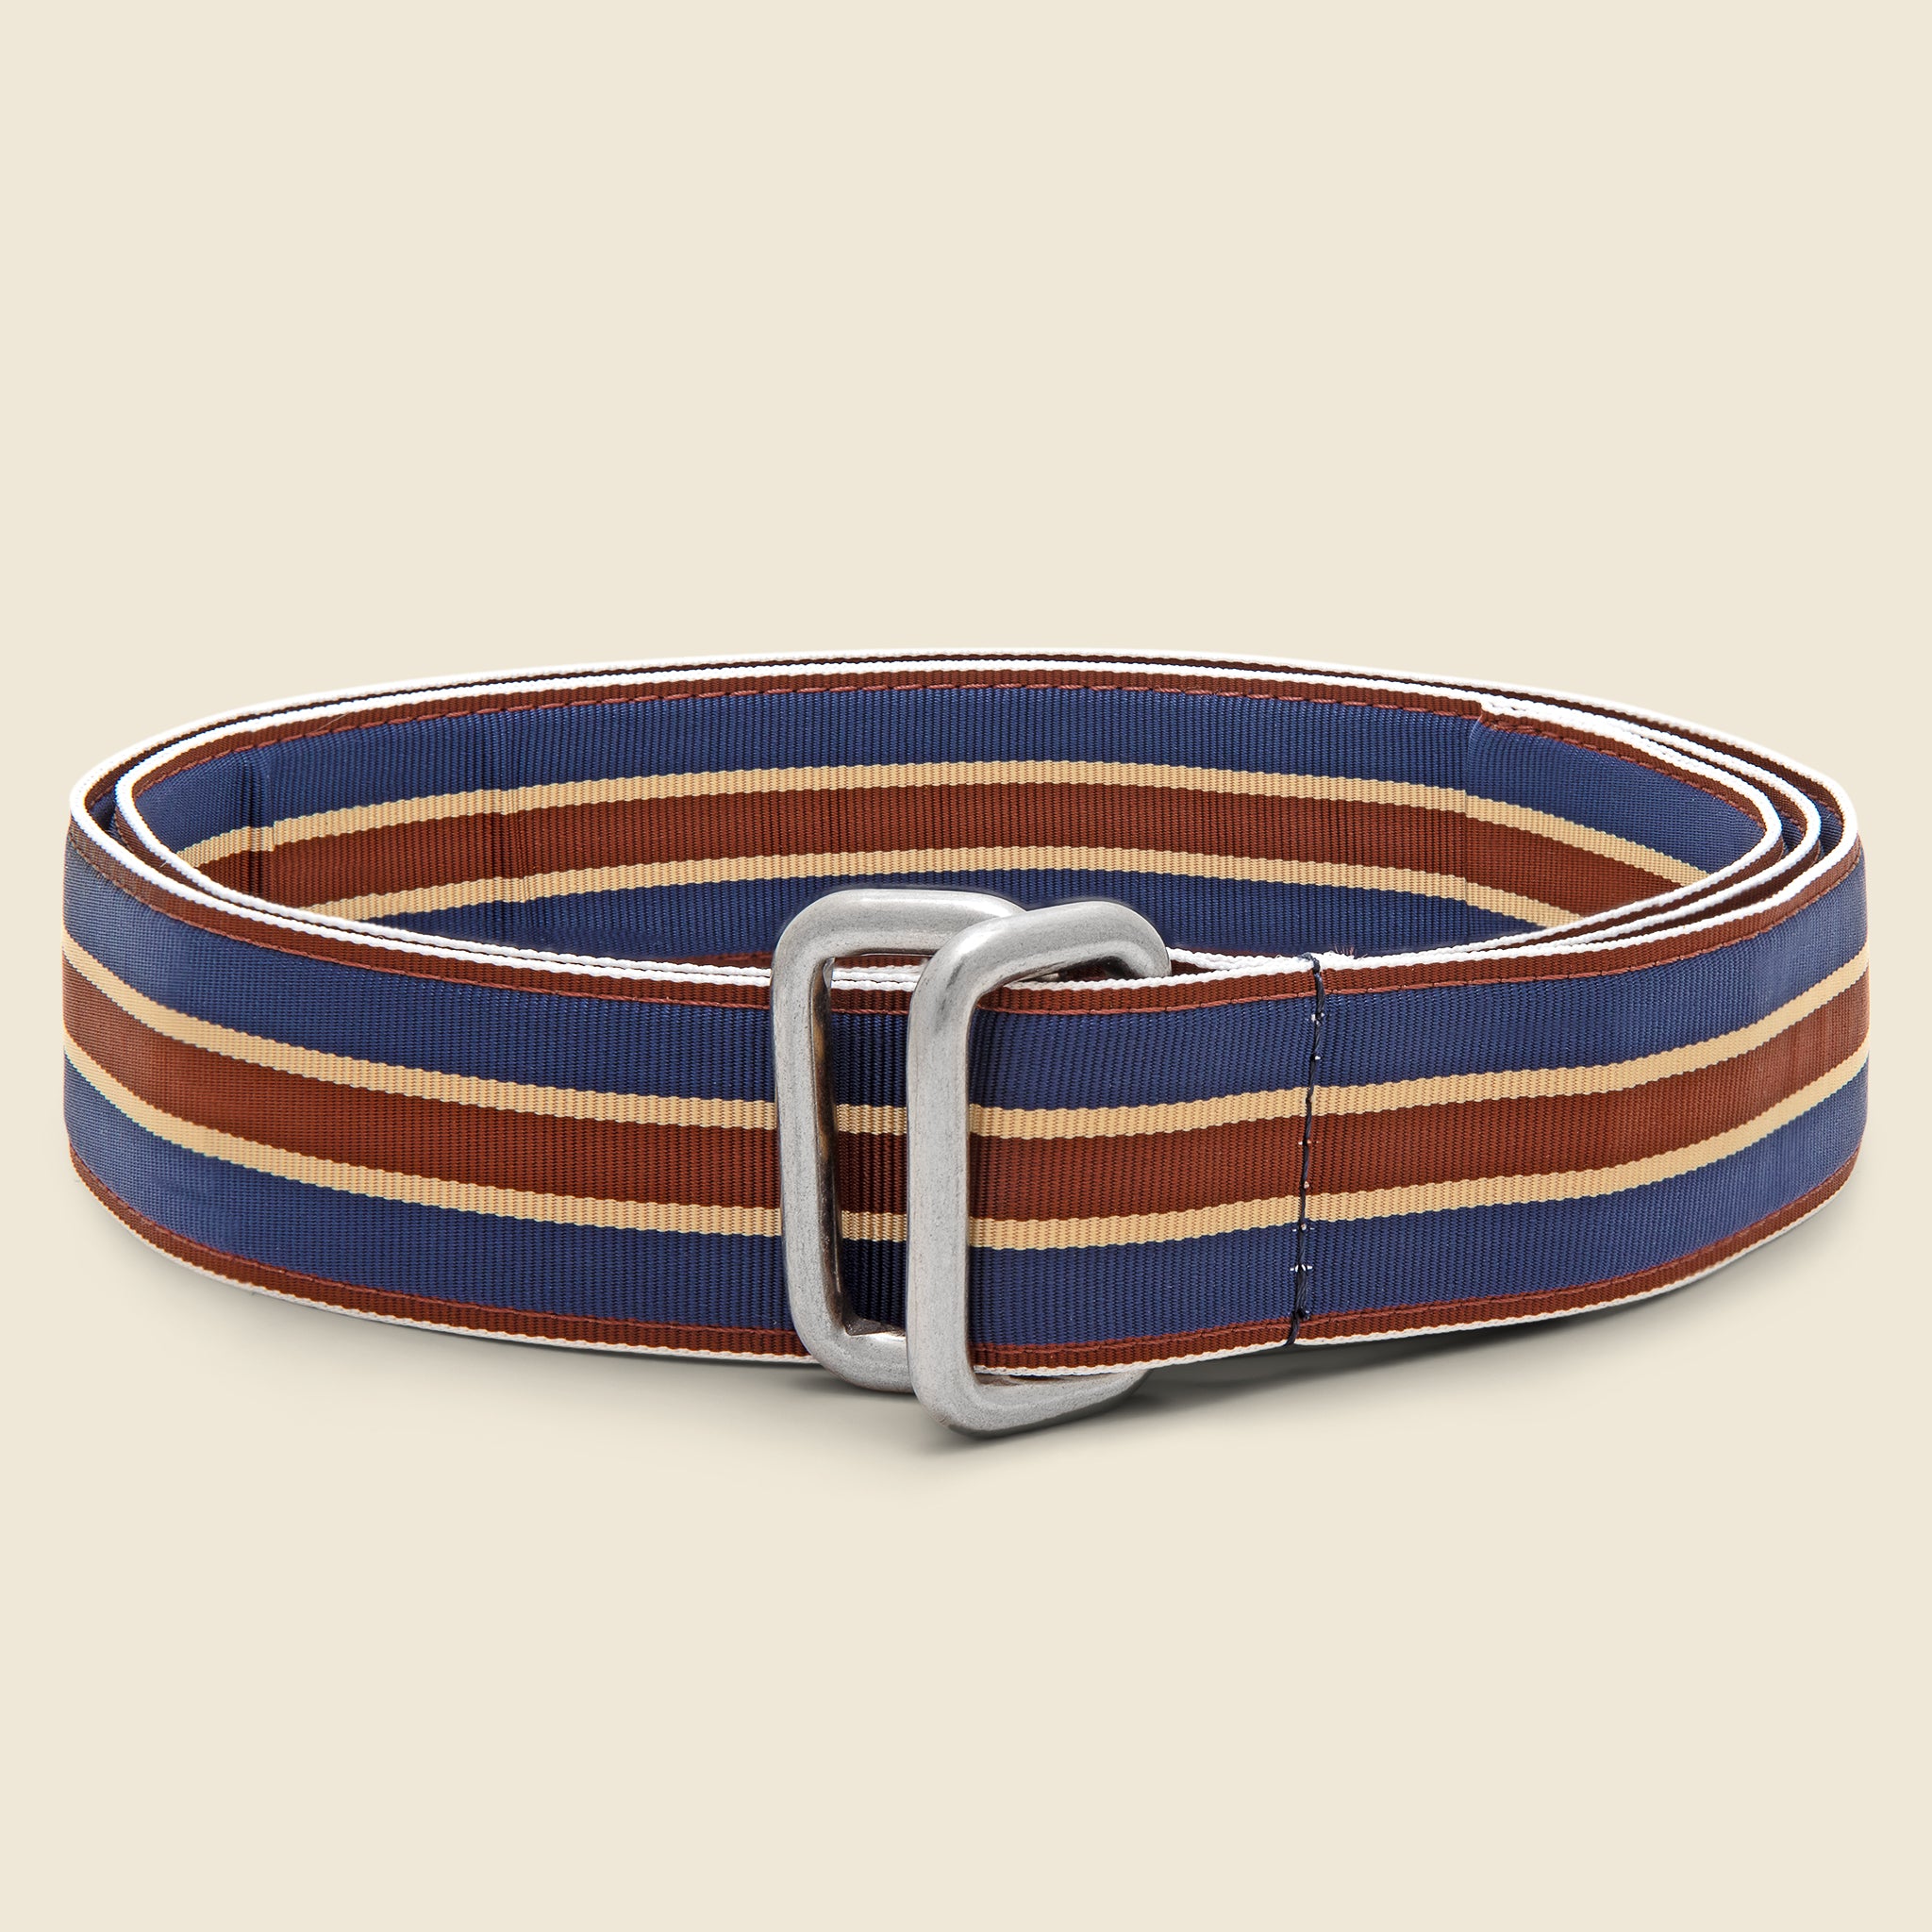 Grosgrain Ring Belt - Navy - BEAMS+ - STAG Provisions - Accessories - Belts